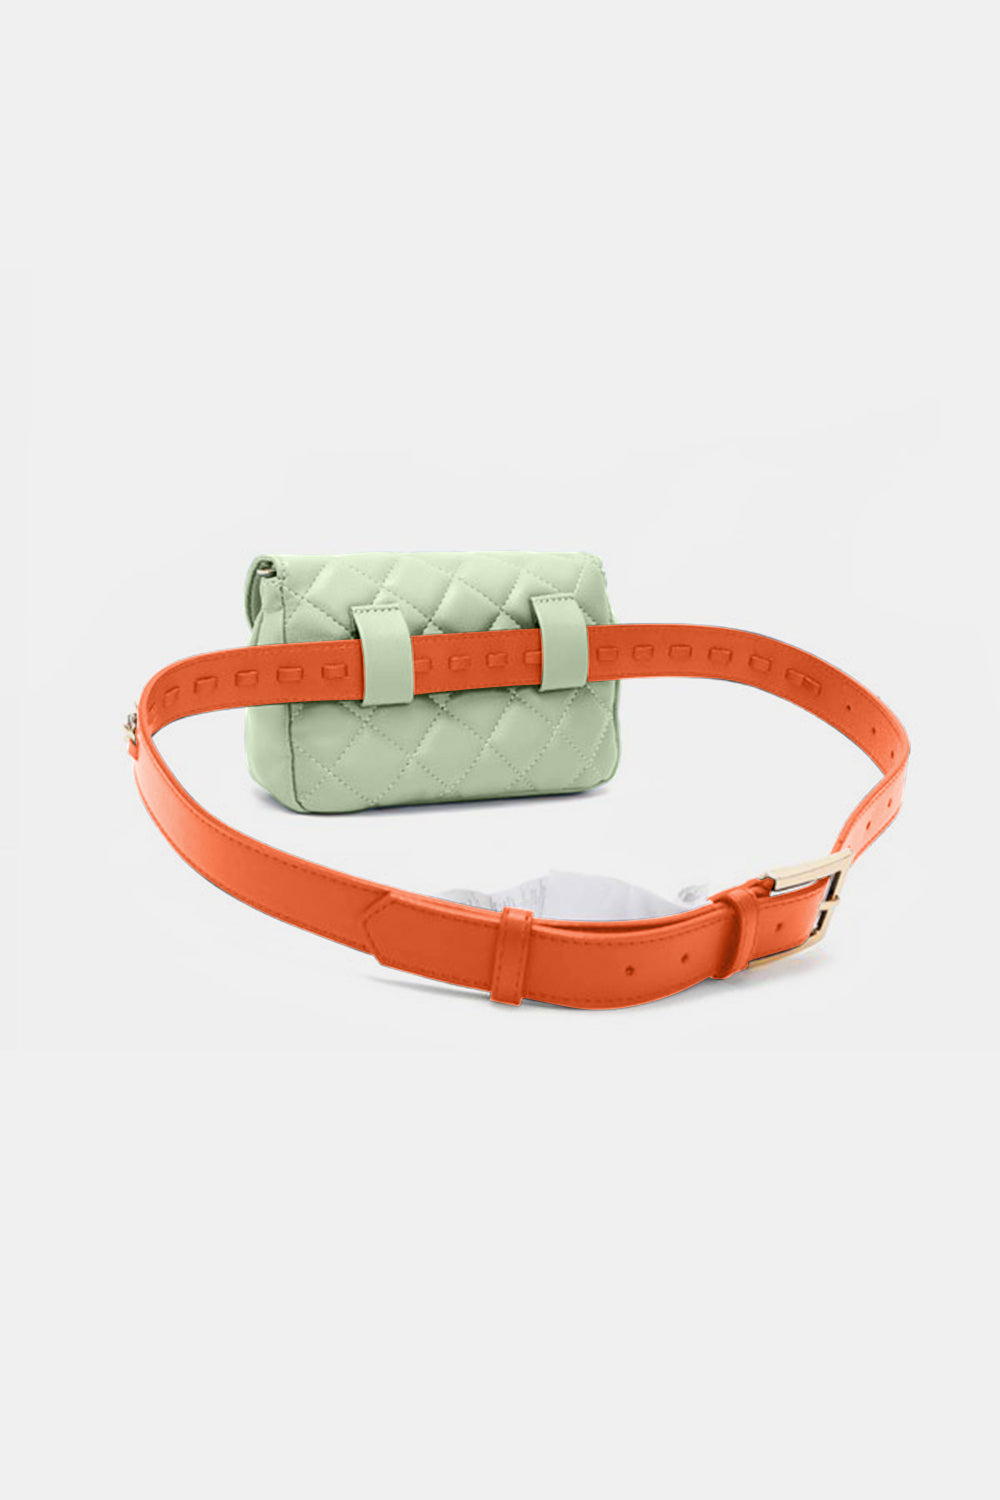 Nikky Quilted Fanny Pack *2 colors*